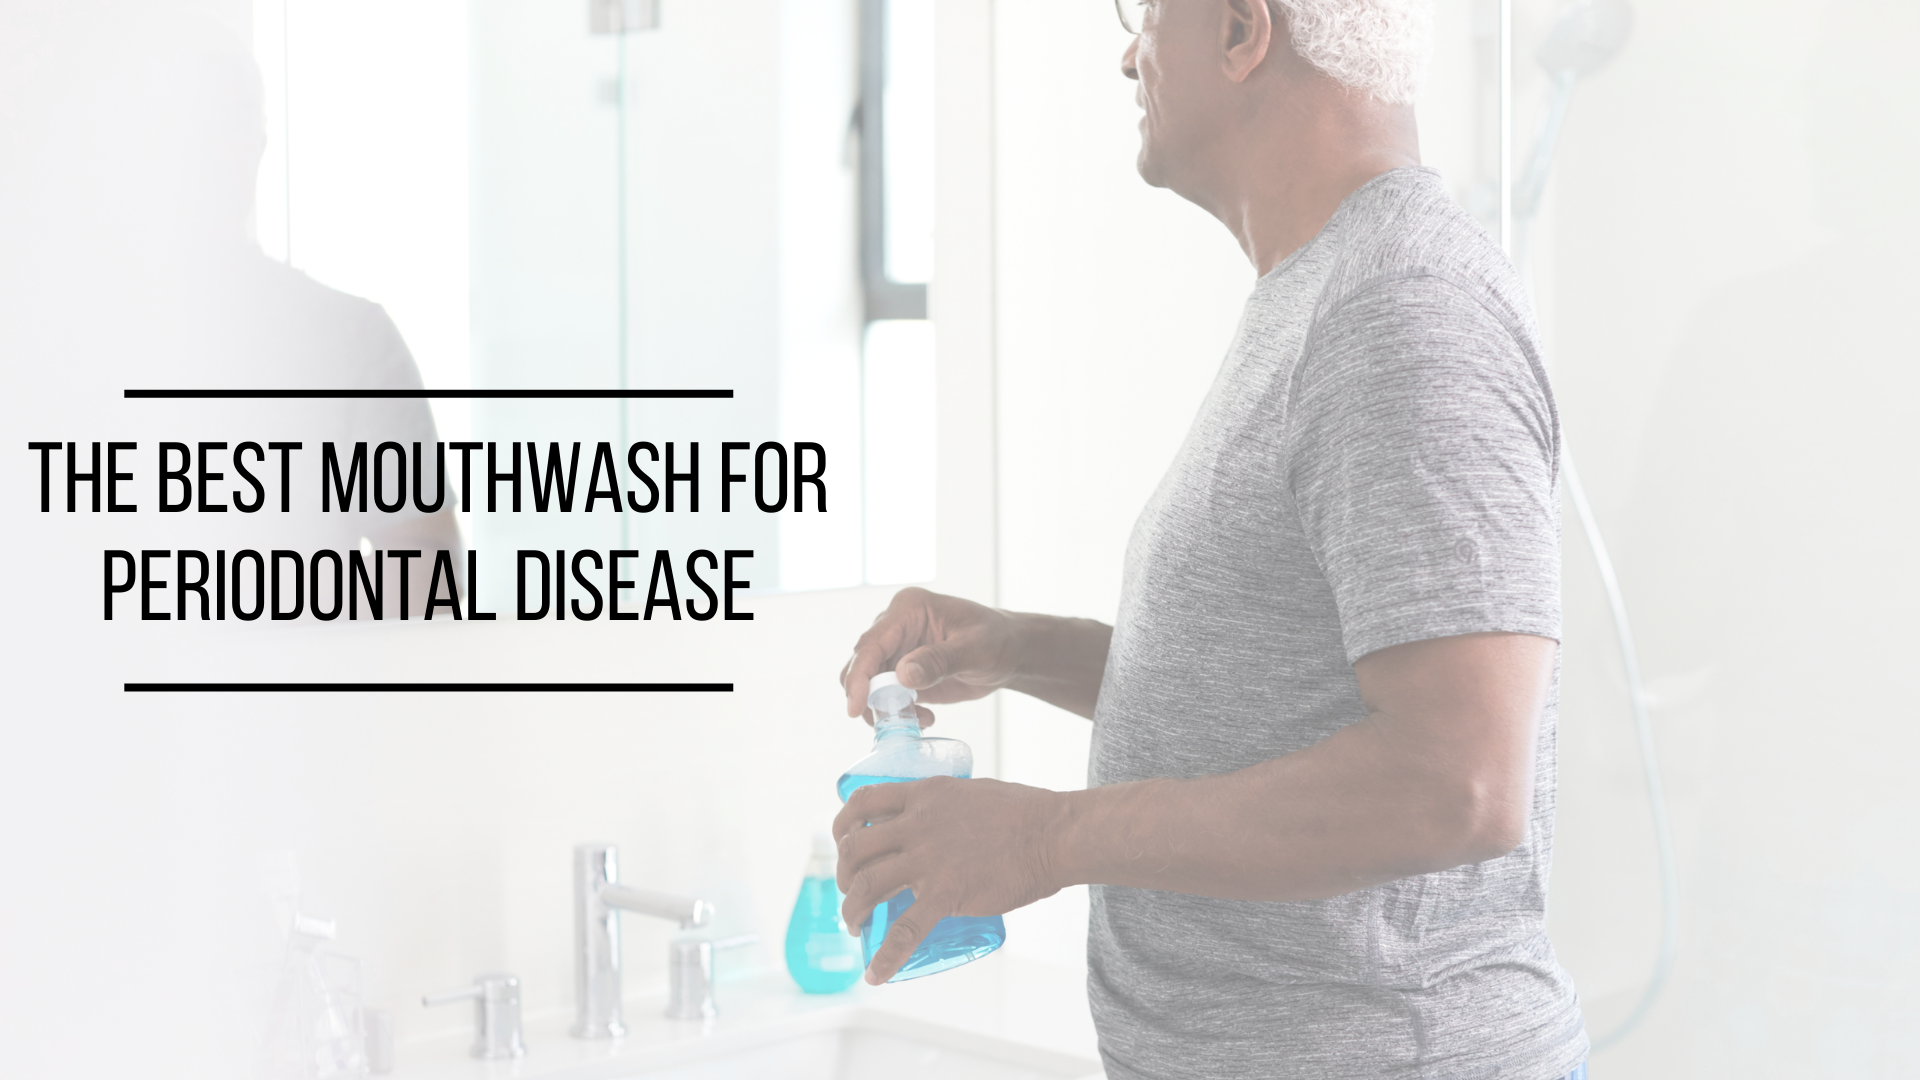 The Best Mouthwash for Periodontal Disease